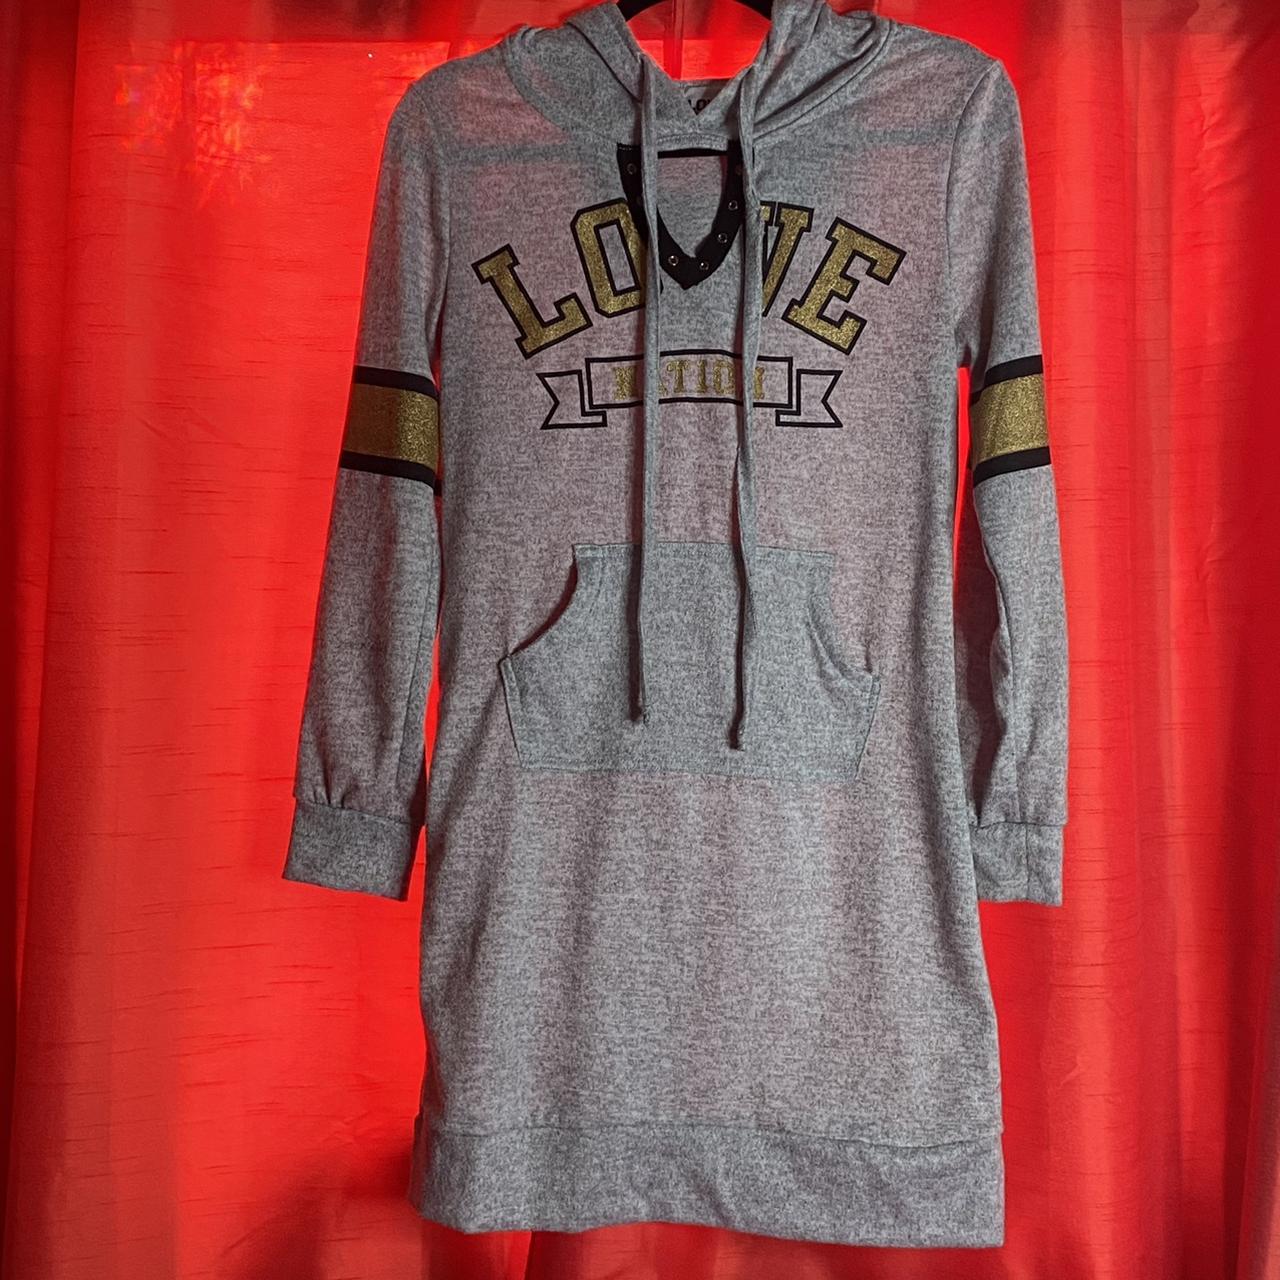 Product Image 1 - Grey Hoodie Dress

Dress has only